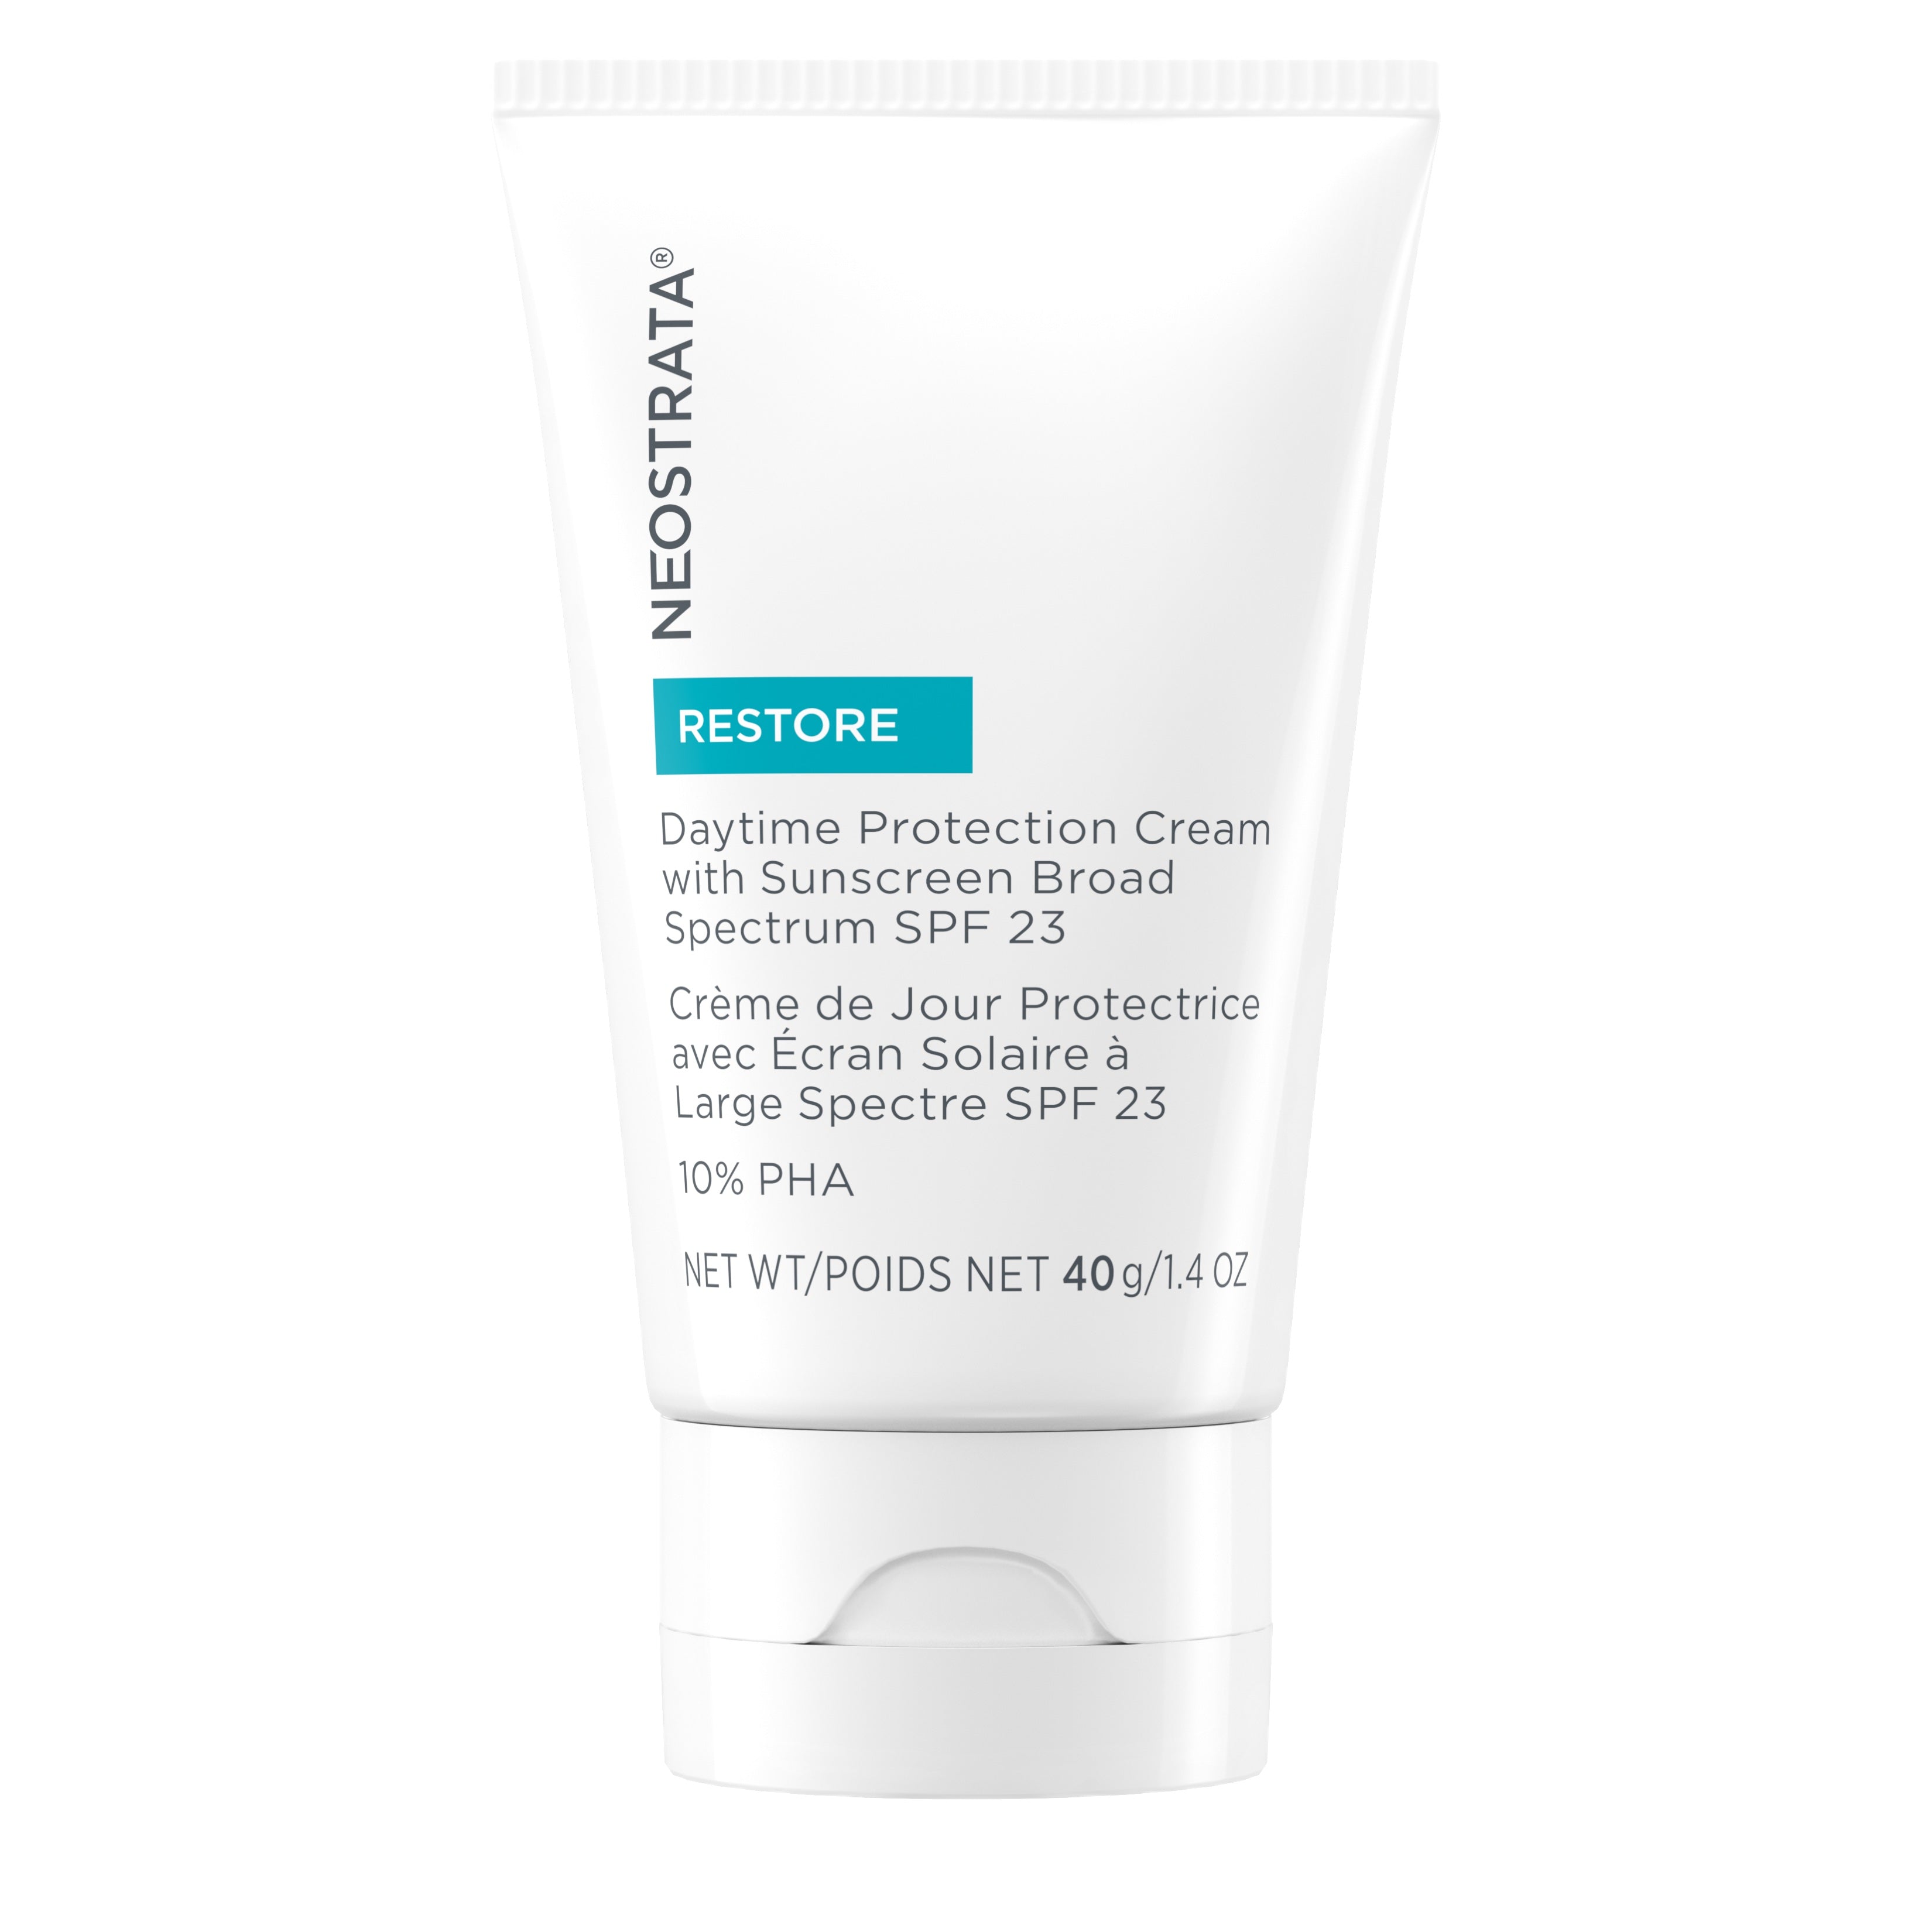 NeoStrata | RESTORE Daytime Protection Cream with Sunscreen Broad Spectrum SPF23 (40g)